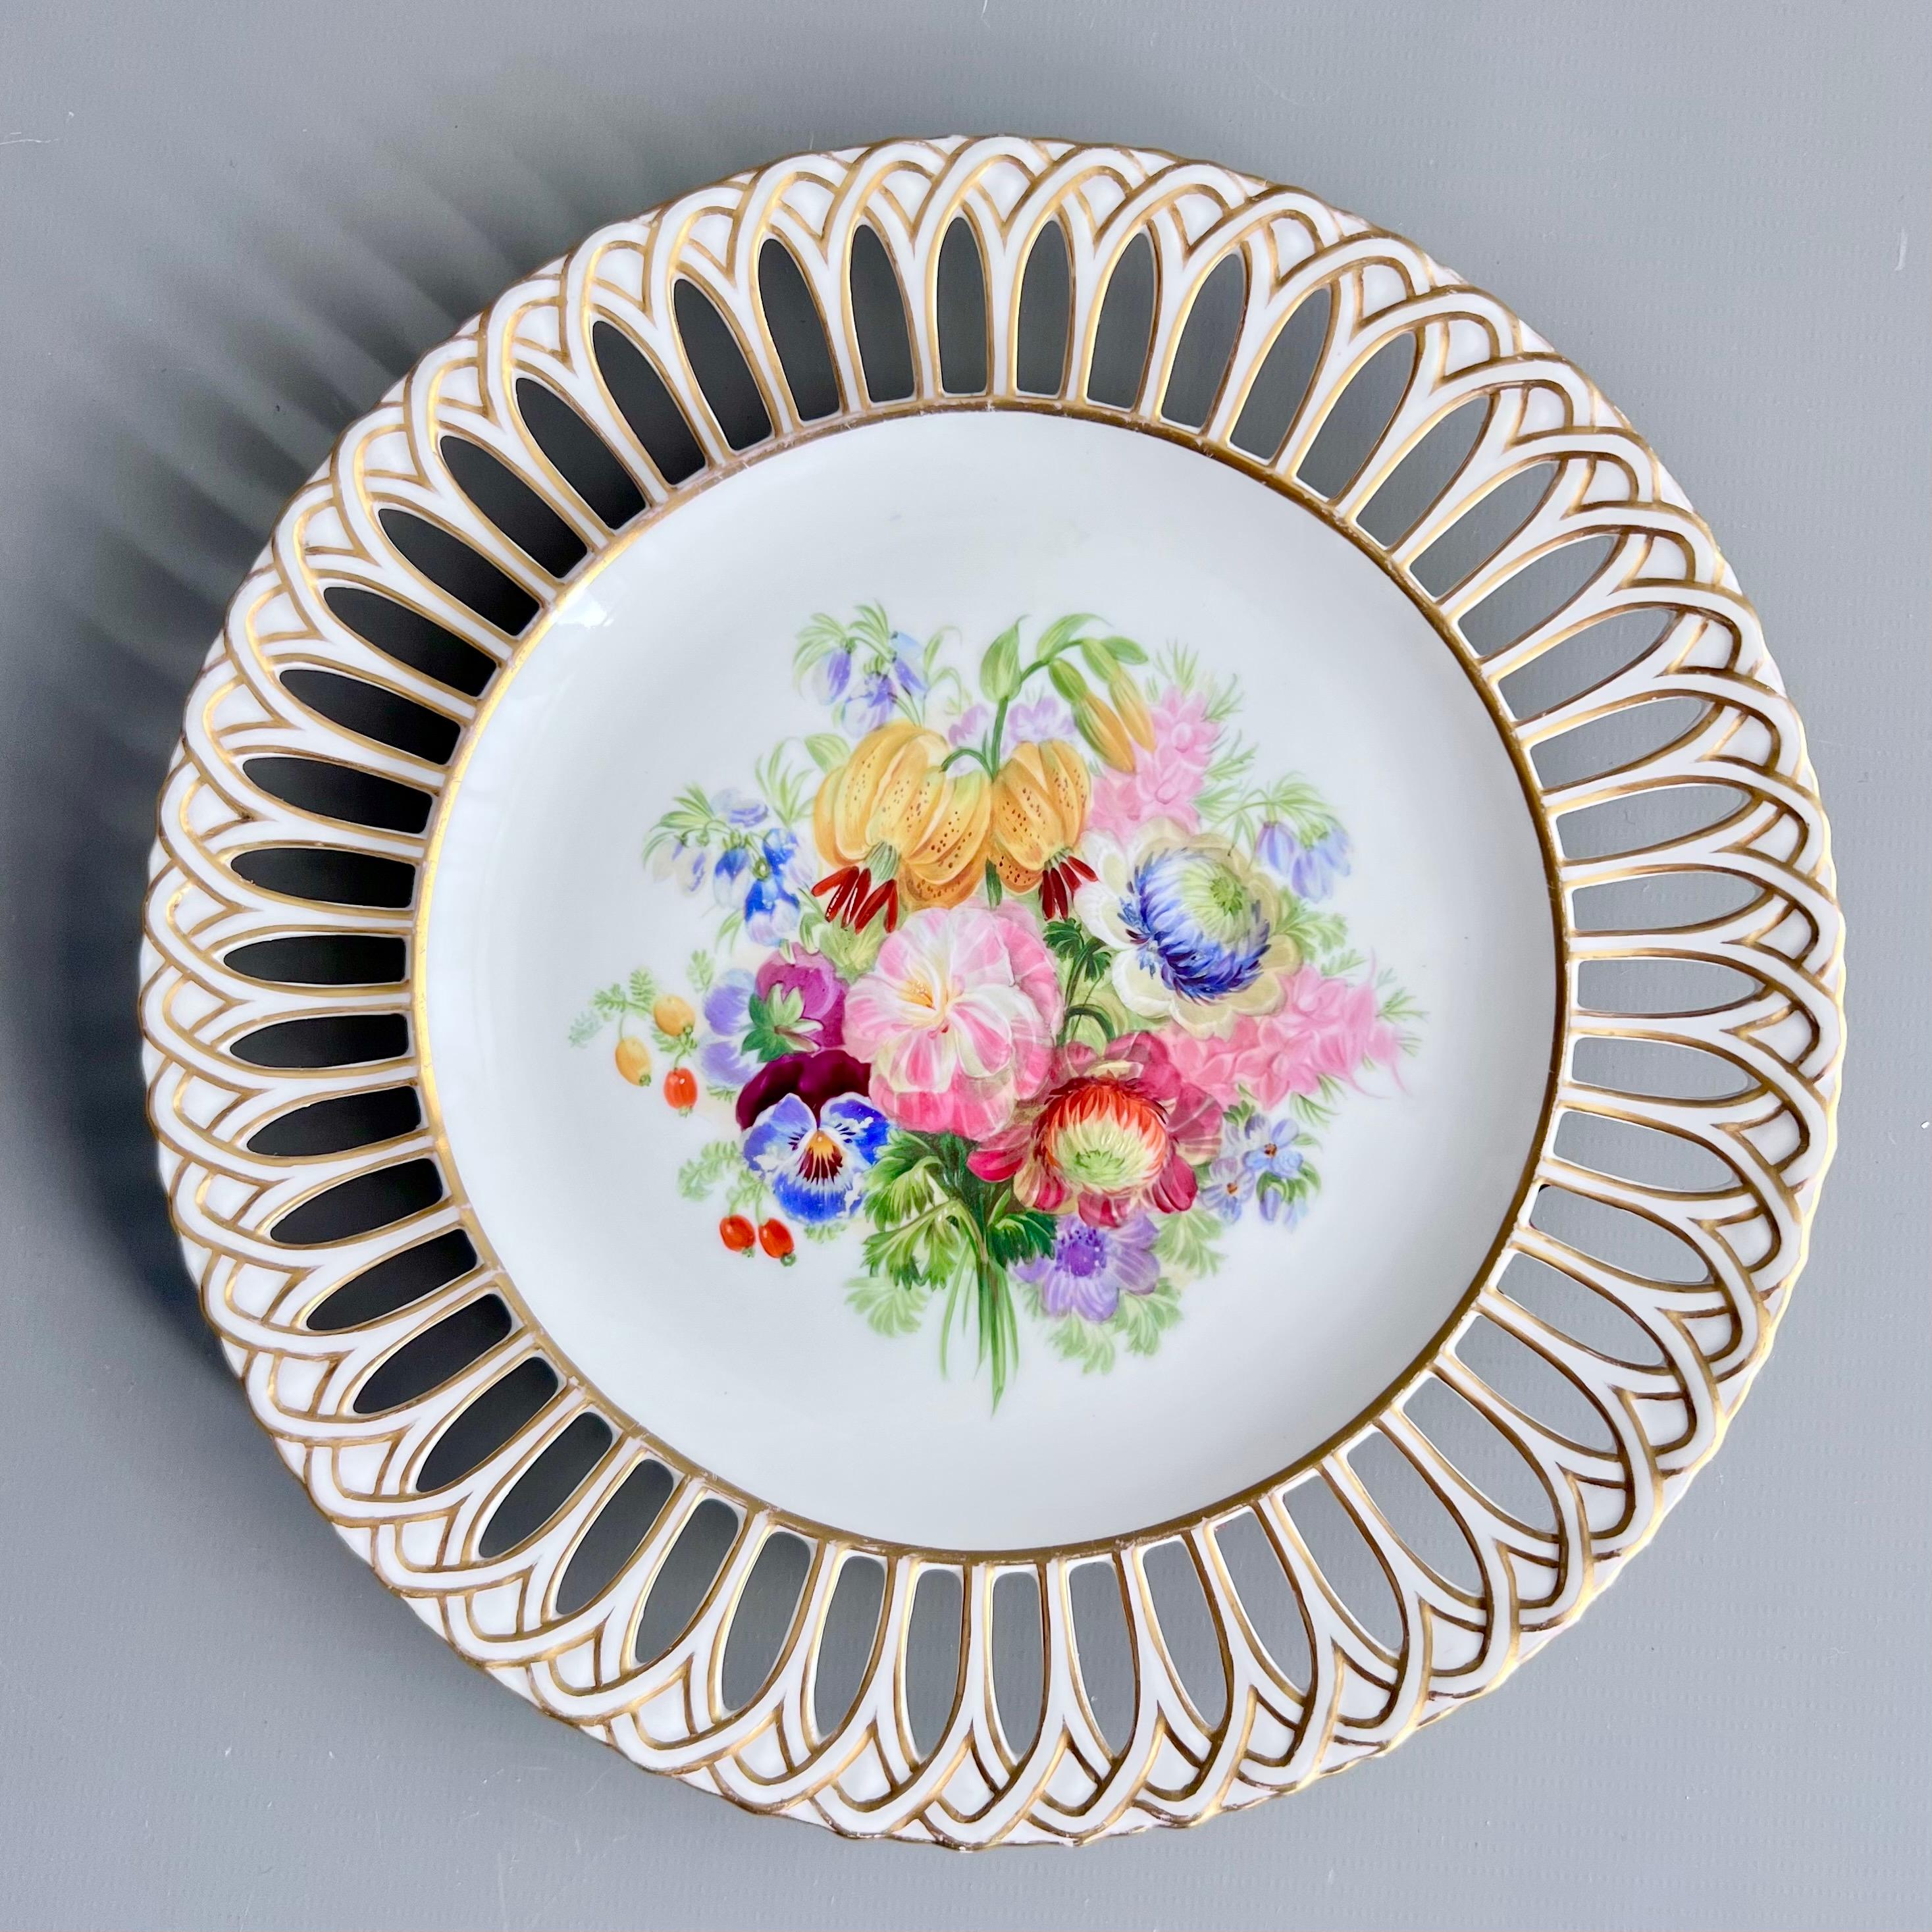 Porcelain Set of 8 Plates by Copeland, Reticulated, Sublime Flowers by Greatbatch, 1848 For Sale